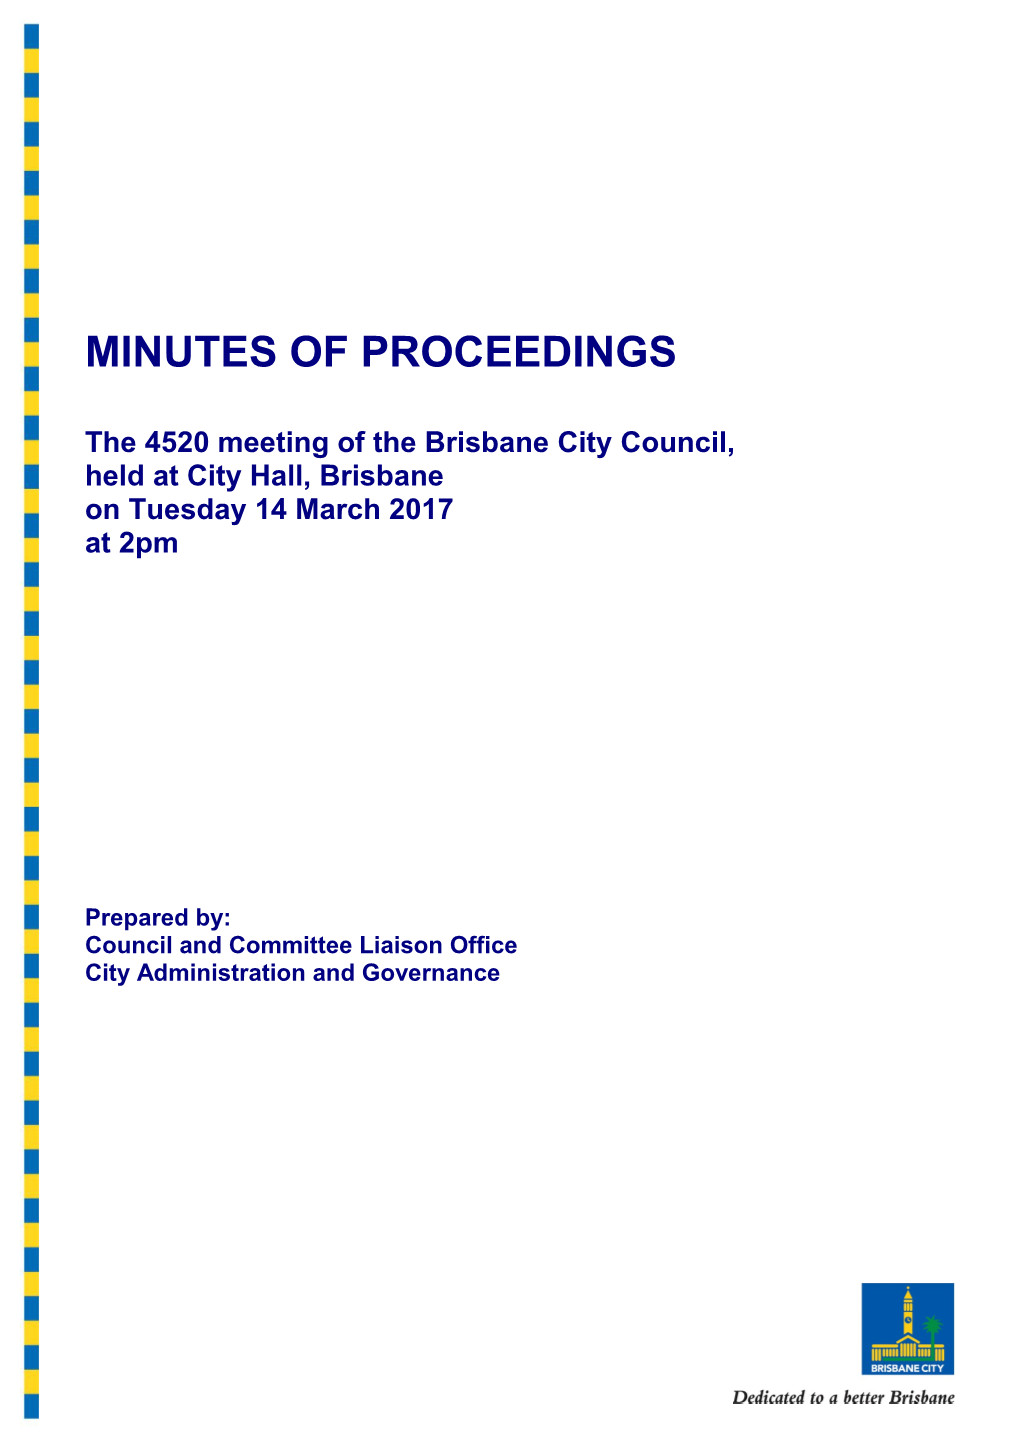 The 4520 Meeting of the Brisbane City Council